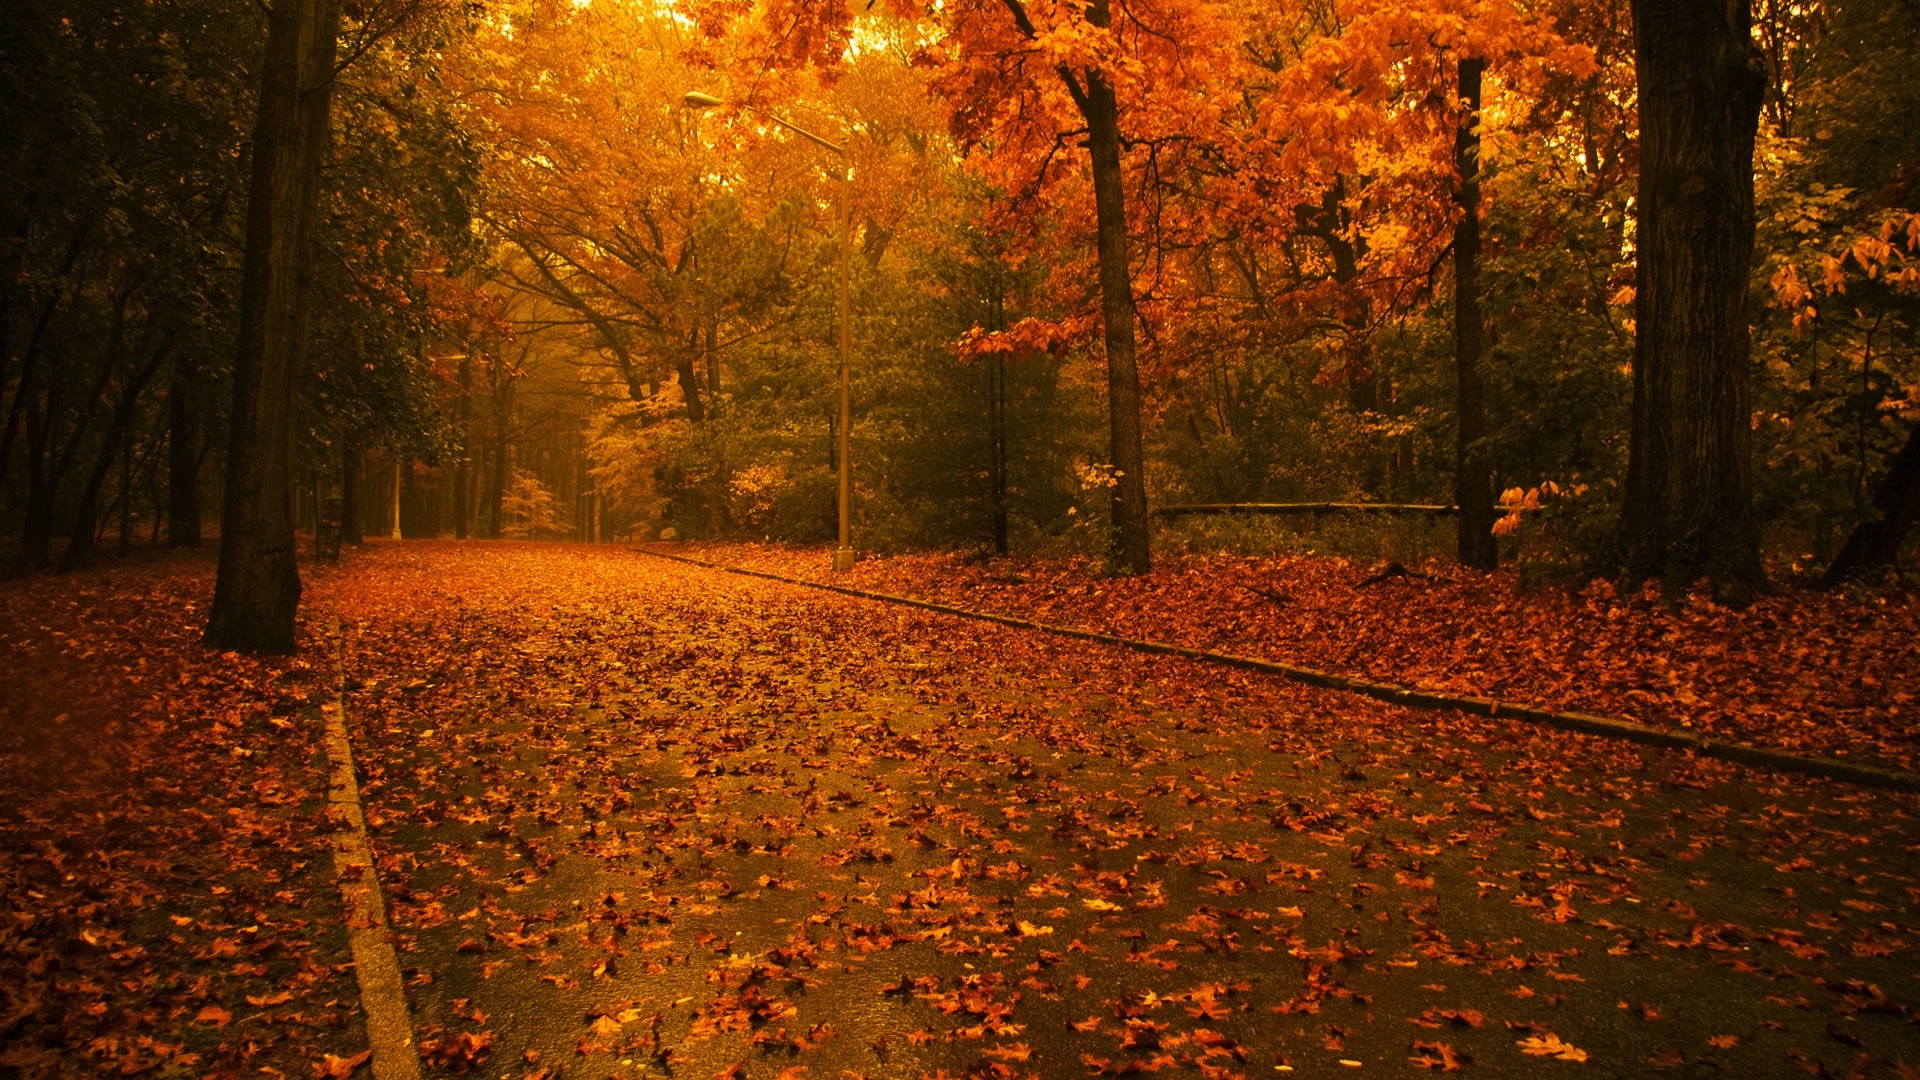 Its time for Autumn for 1920 x 1080 HDTV 1080p resolution